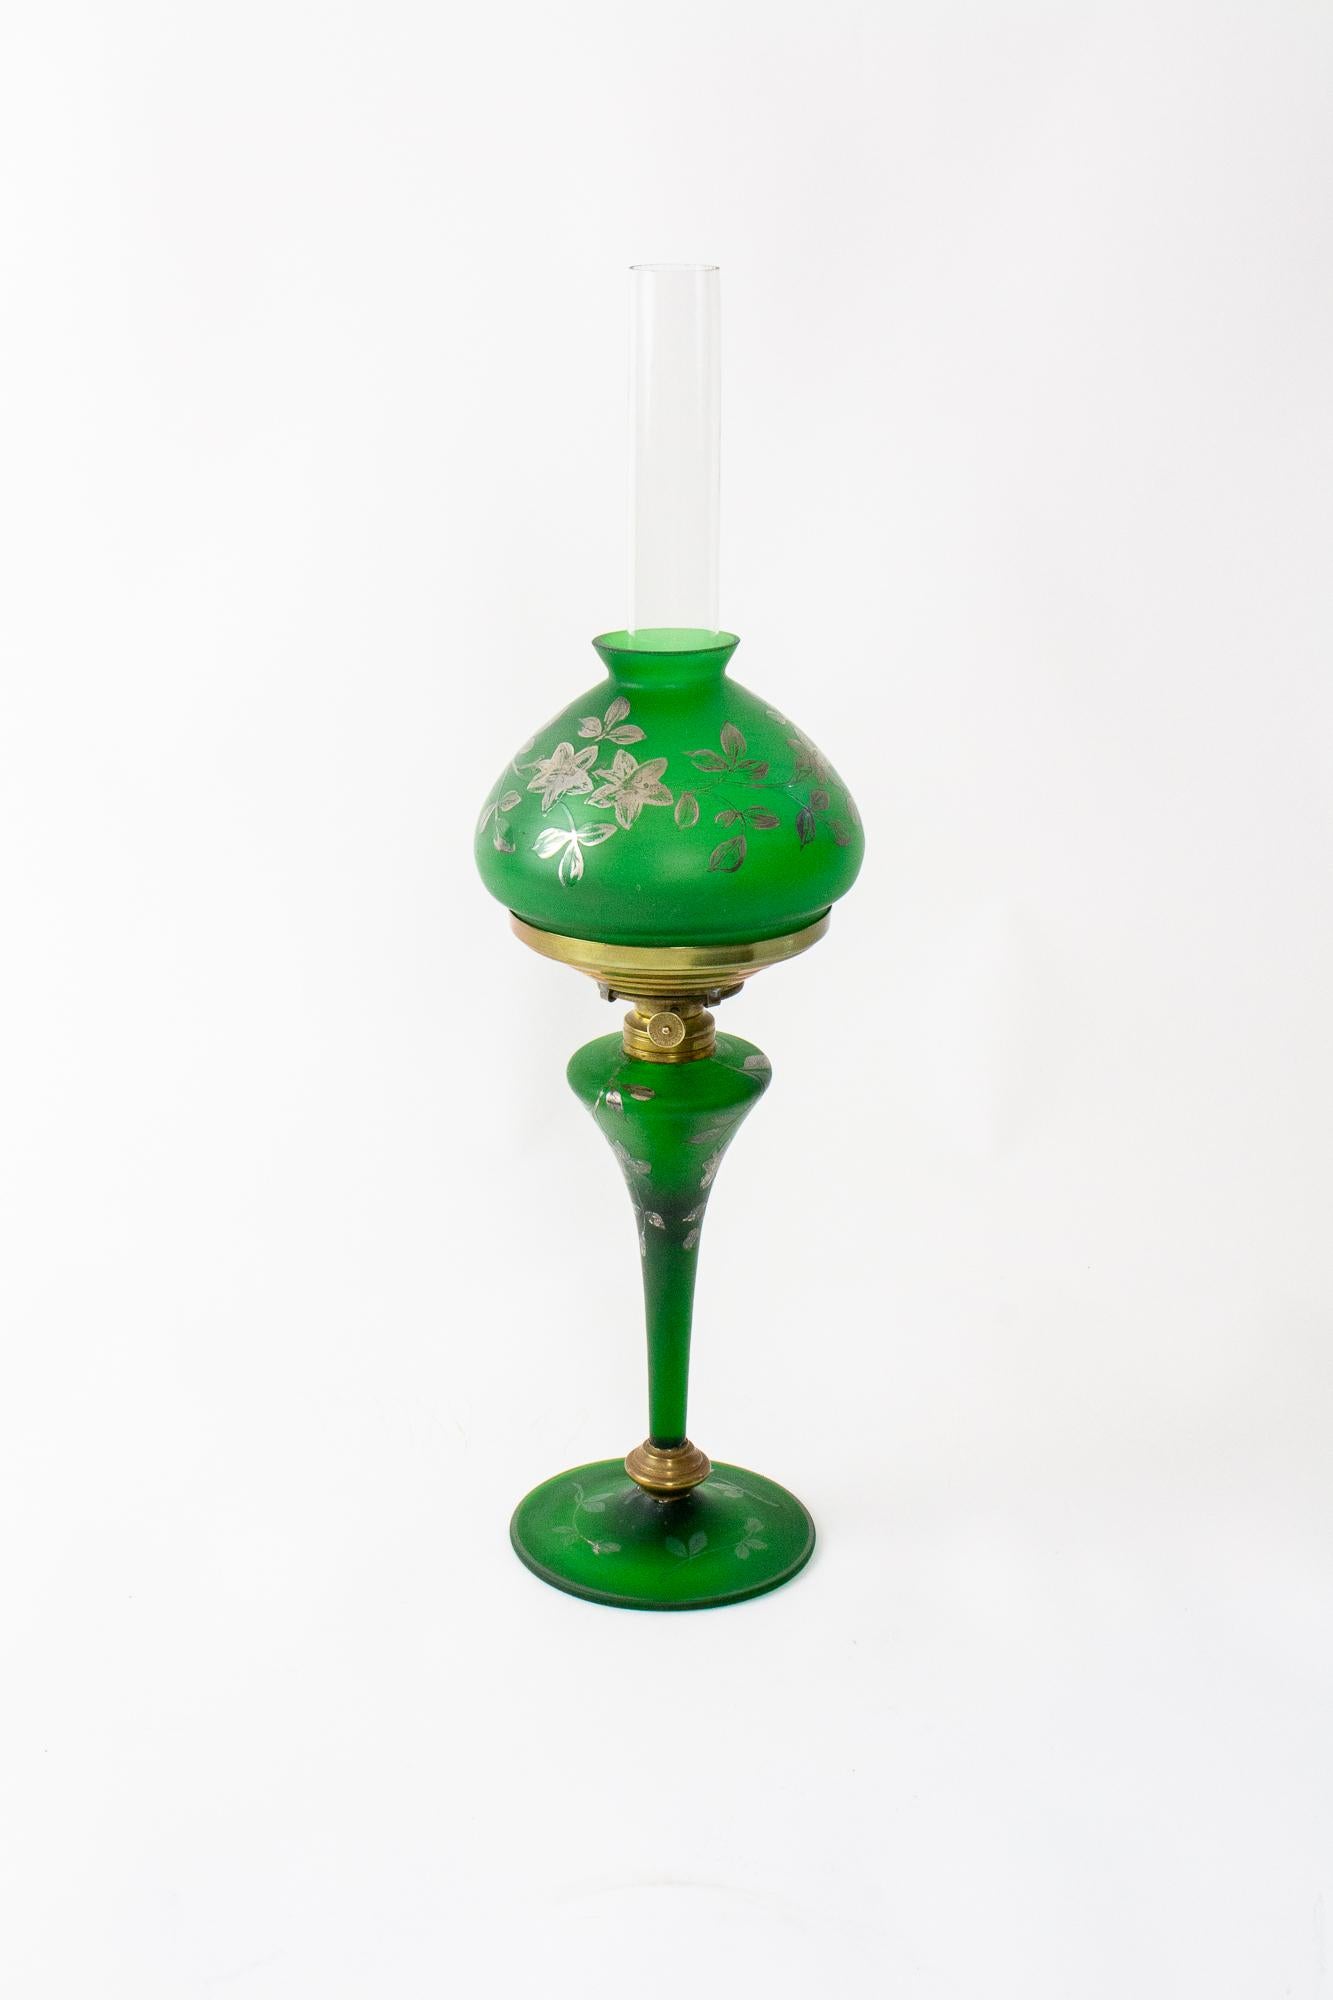 Green art glass lamp. Burner is marked “Manhattan Brass Co.” Body and shade are a frosted green blown art glass with hand painted silver flowers. Sleek Art nouveau profile, the glass base tapers to a round base. The matching shade is a domed shape.